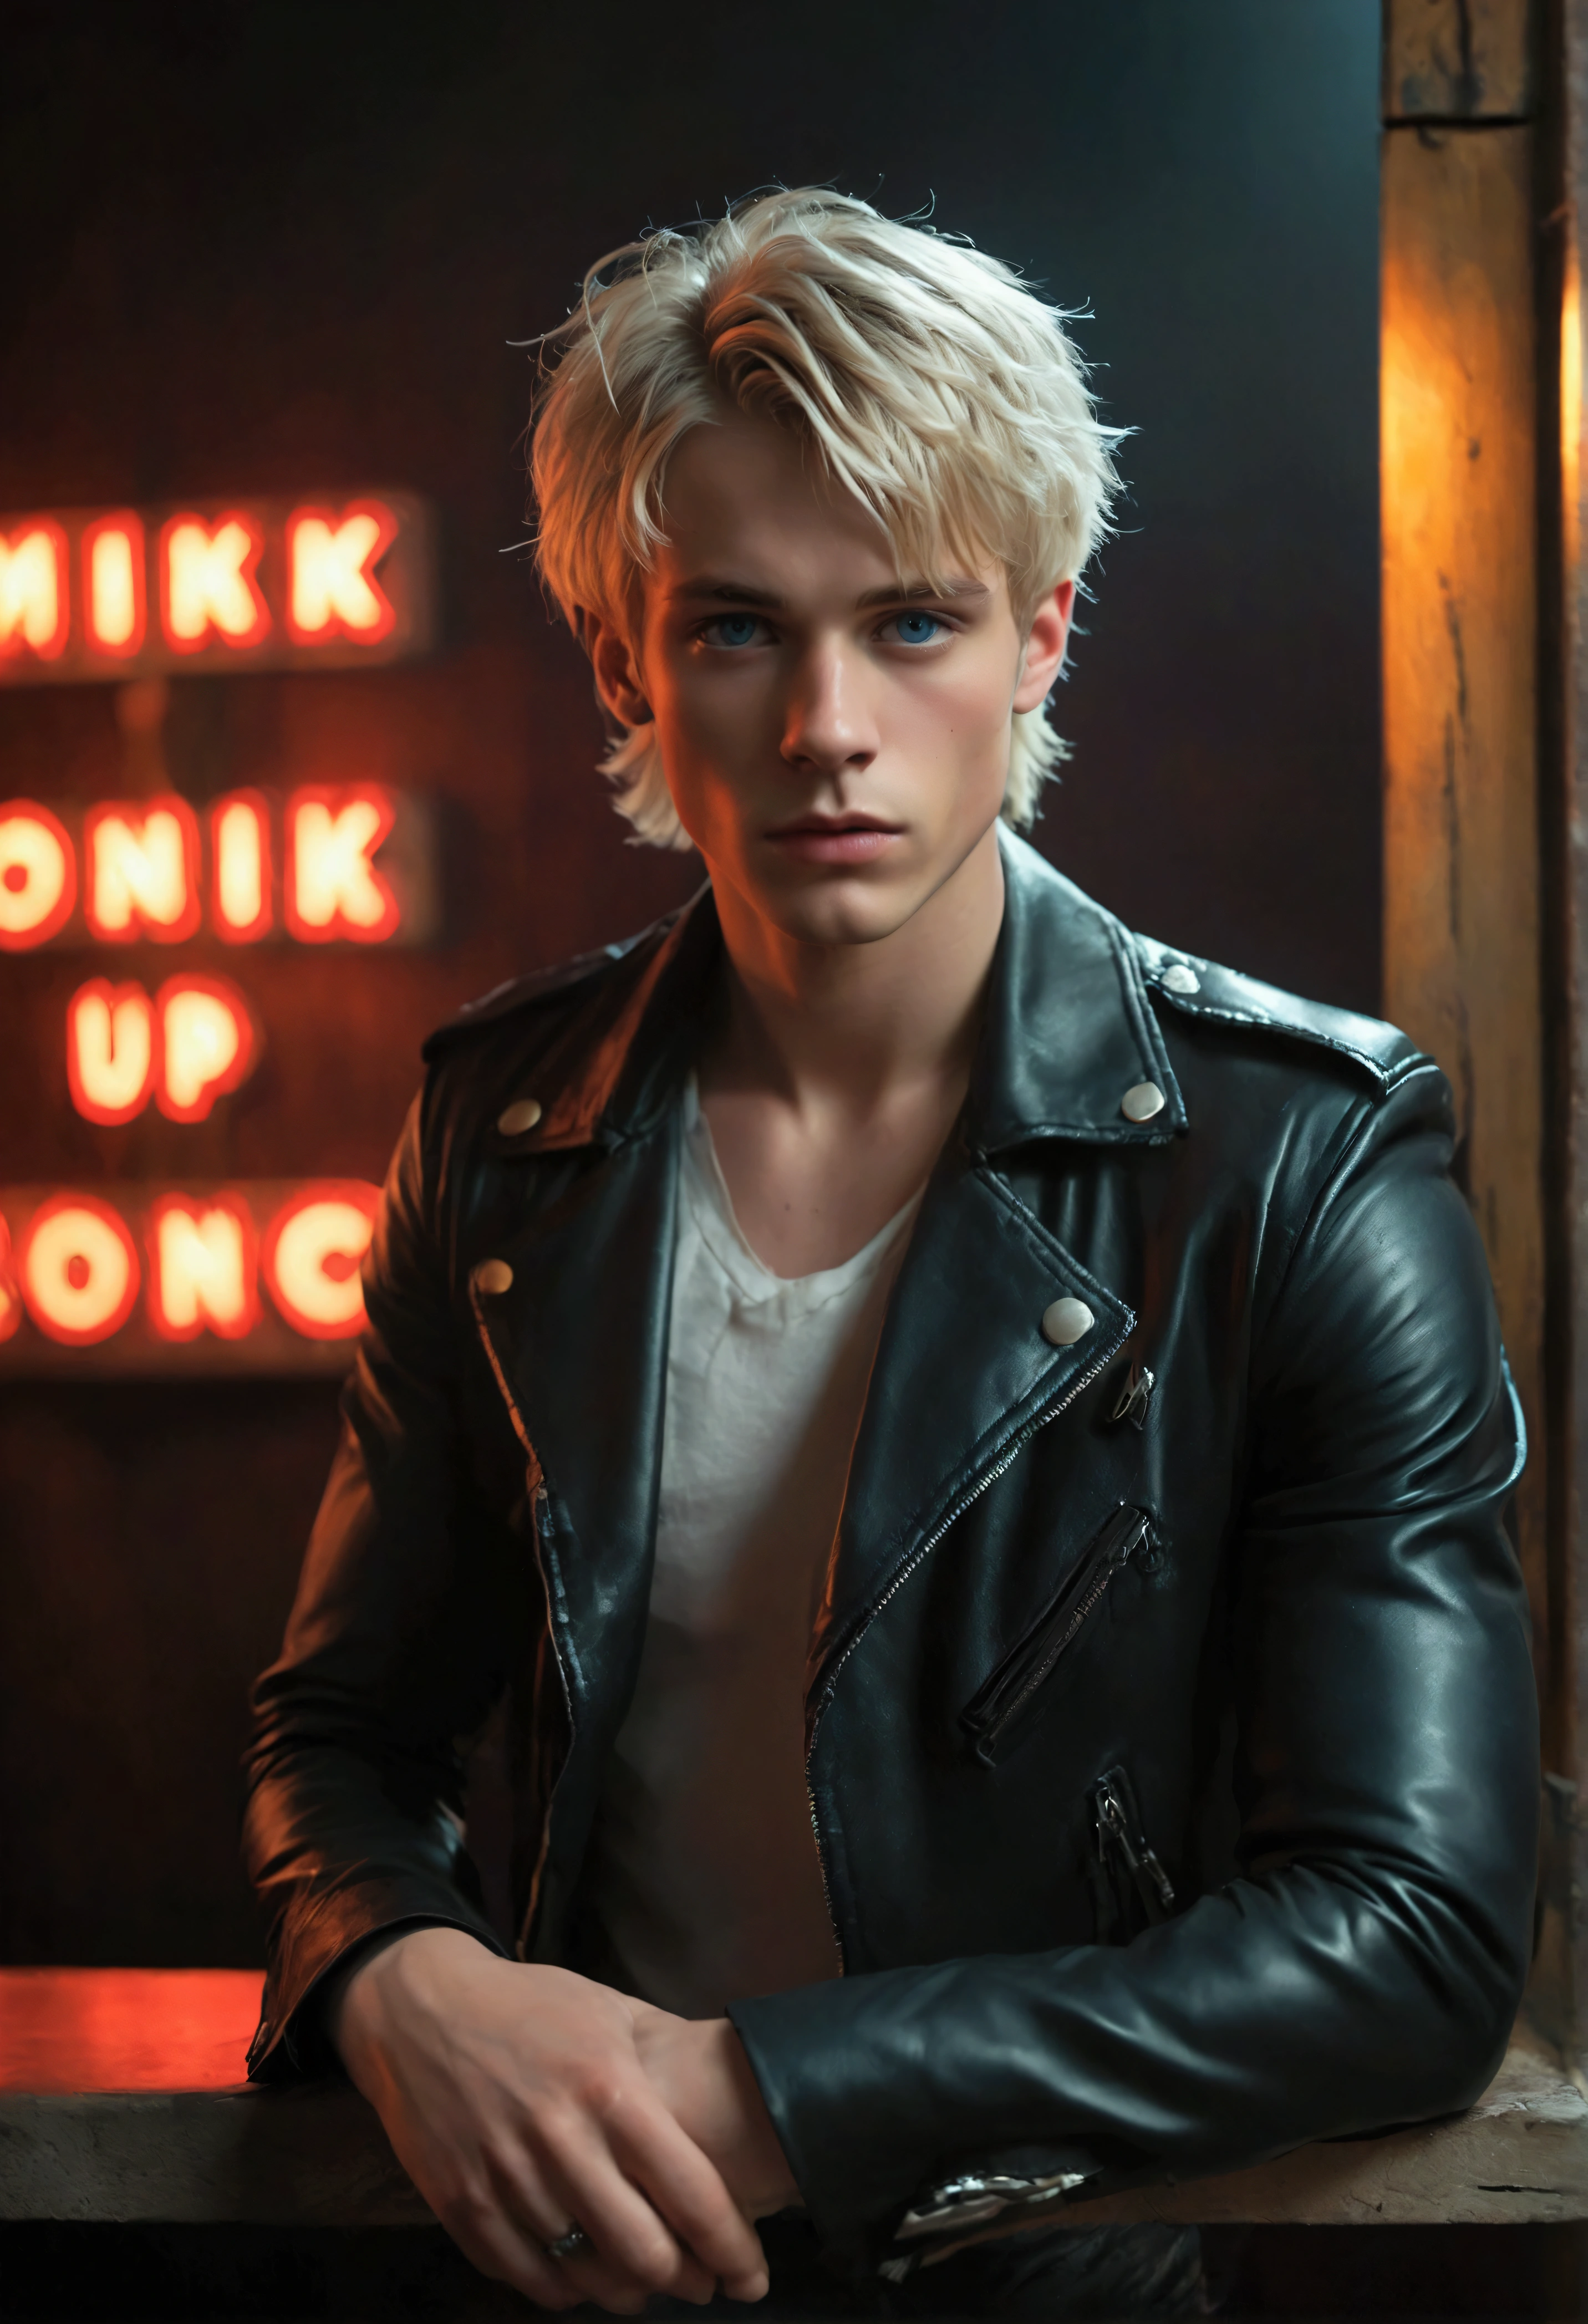 Hyper realistic, dark vibes, solo, young male fashion model Dominik Sadoch, boyish, 22 years, pale skin, blue eyes, (short textured blond hair:1.1), layered bangs, black leather jacket, dark lighting, in luxury strip club room, (smirk:1.1), (holding a knife up:1.1), (neon sign in background that says "CONTEXT":1.1)